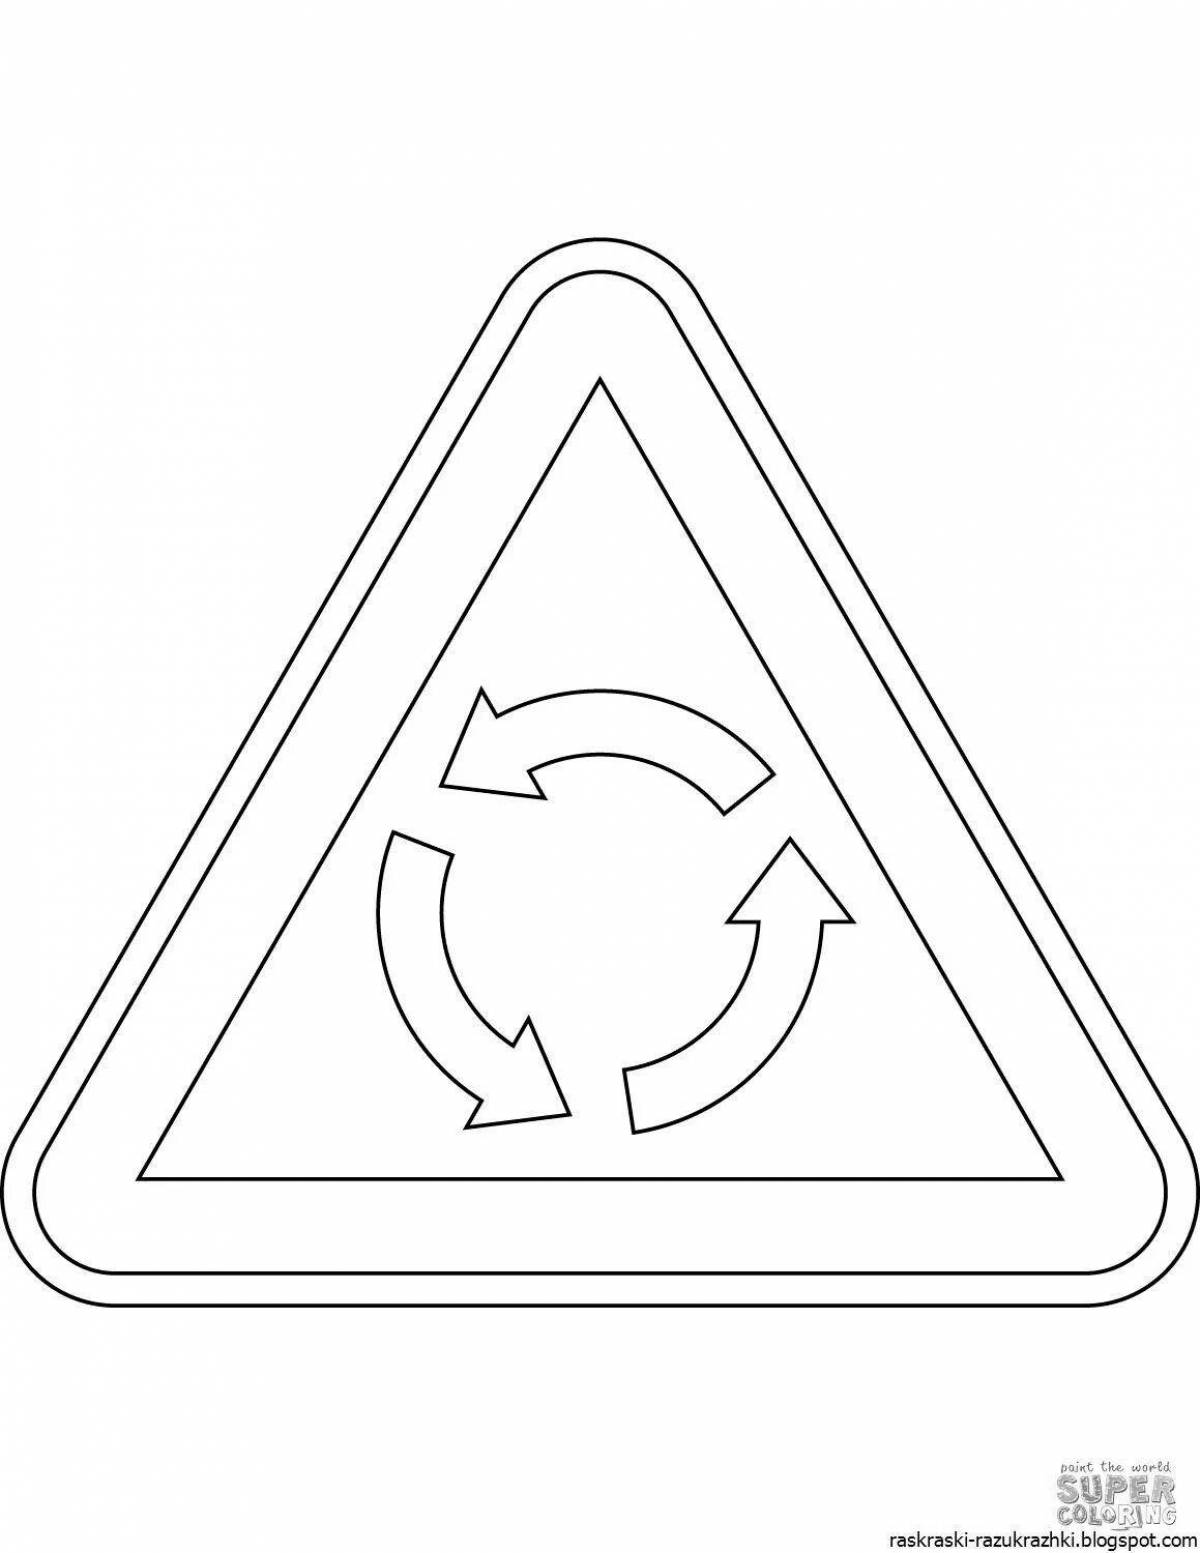 Intriguing road signs coloring pages